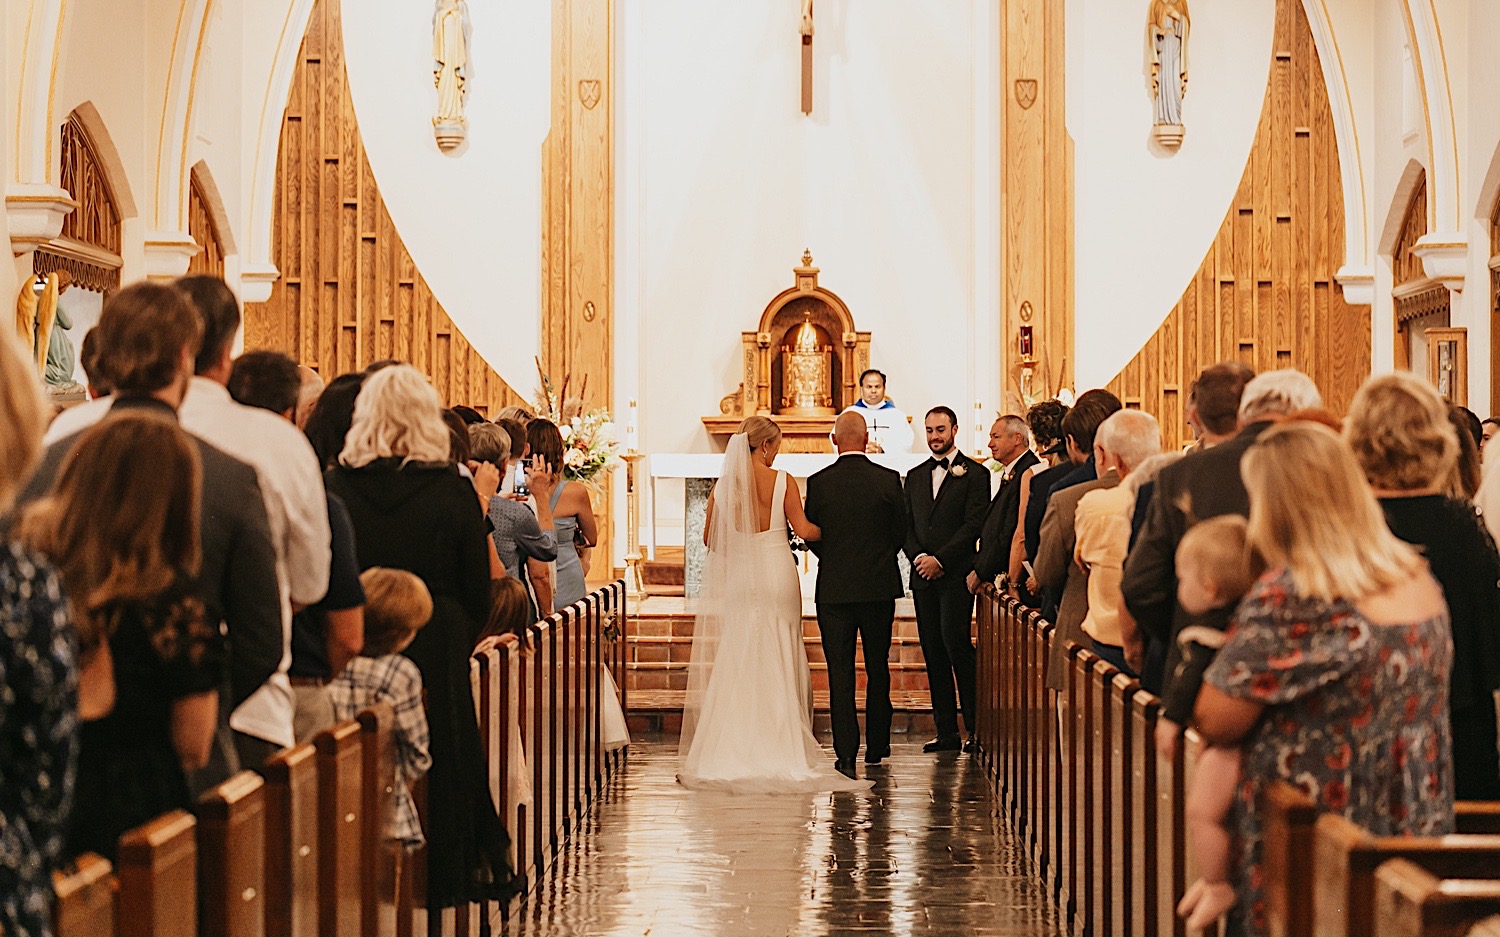 In a church a bride is walked down the aisle by her father to the groom waiting 